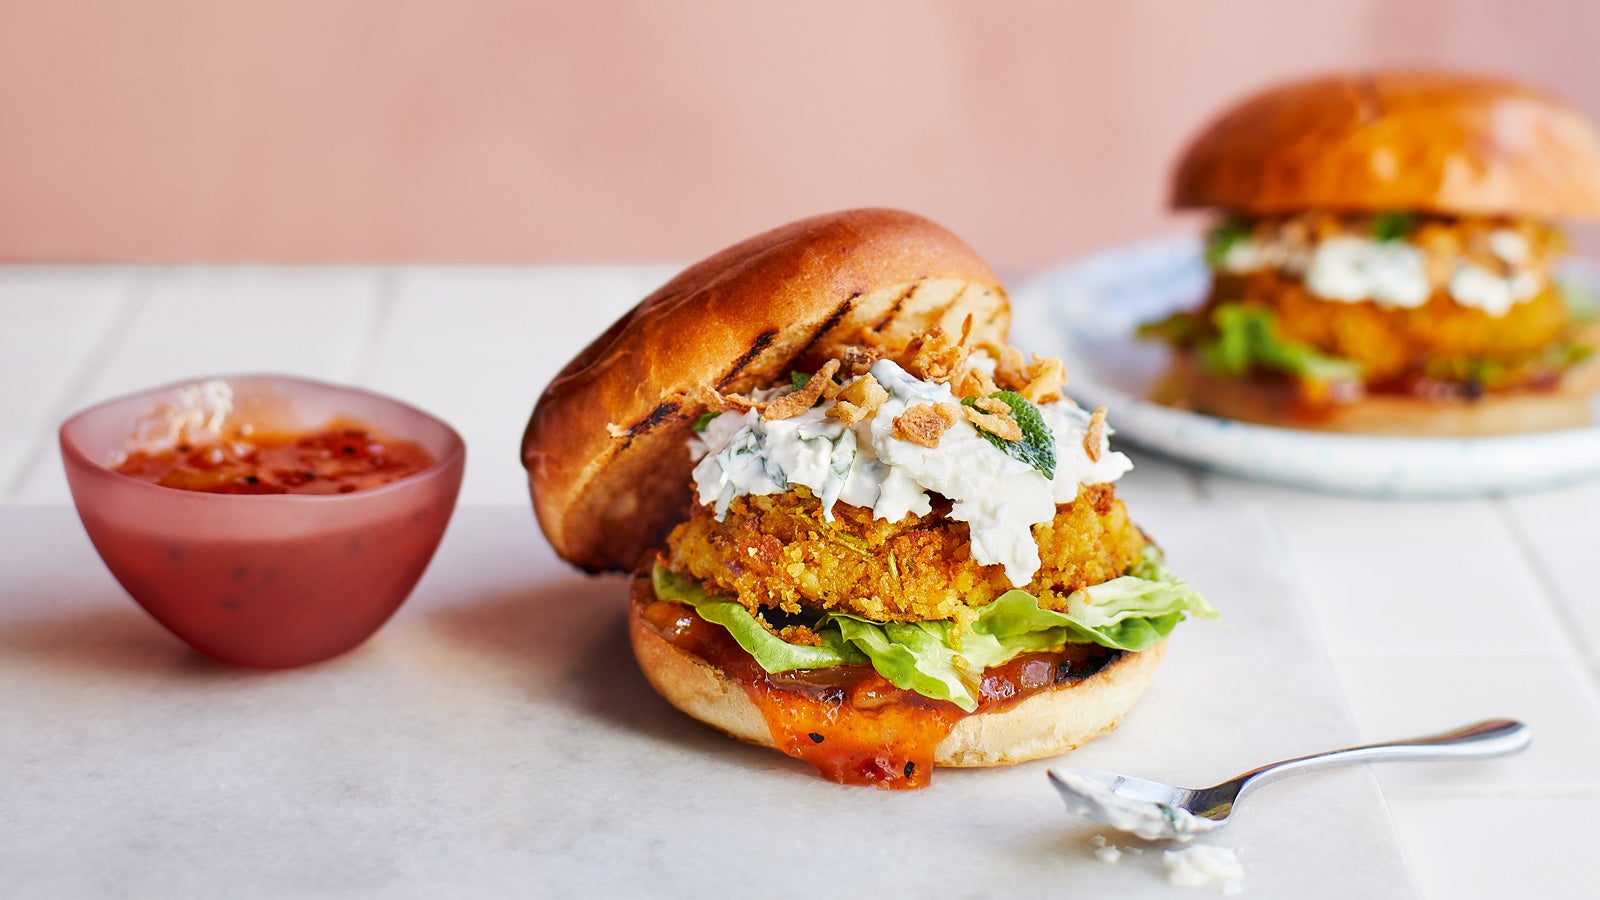 One chickpea burger served in a brioche bun with lettuce, relish and caulflower raita, nextto a small put of relish, with another chickpea burger out of focus in the background